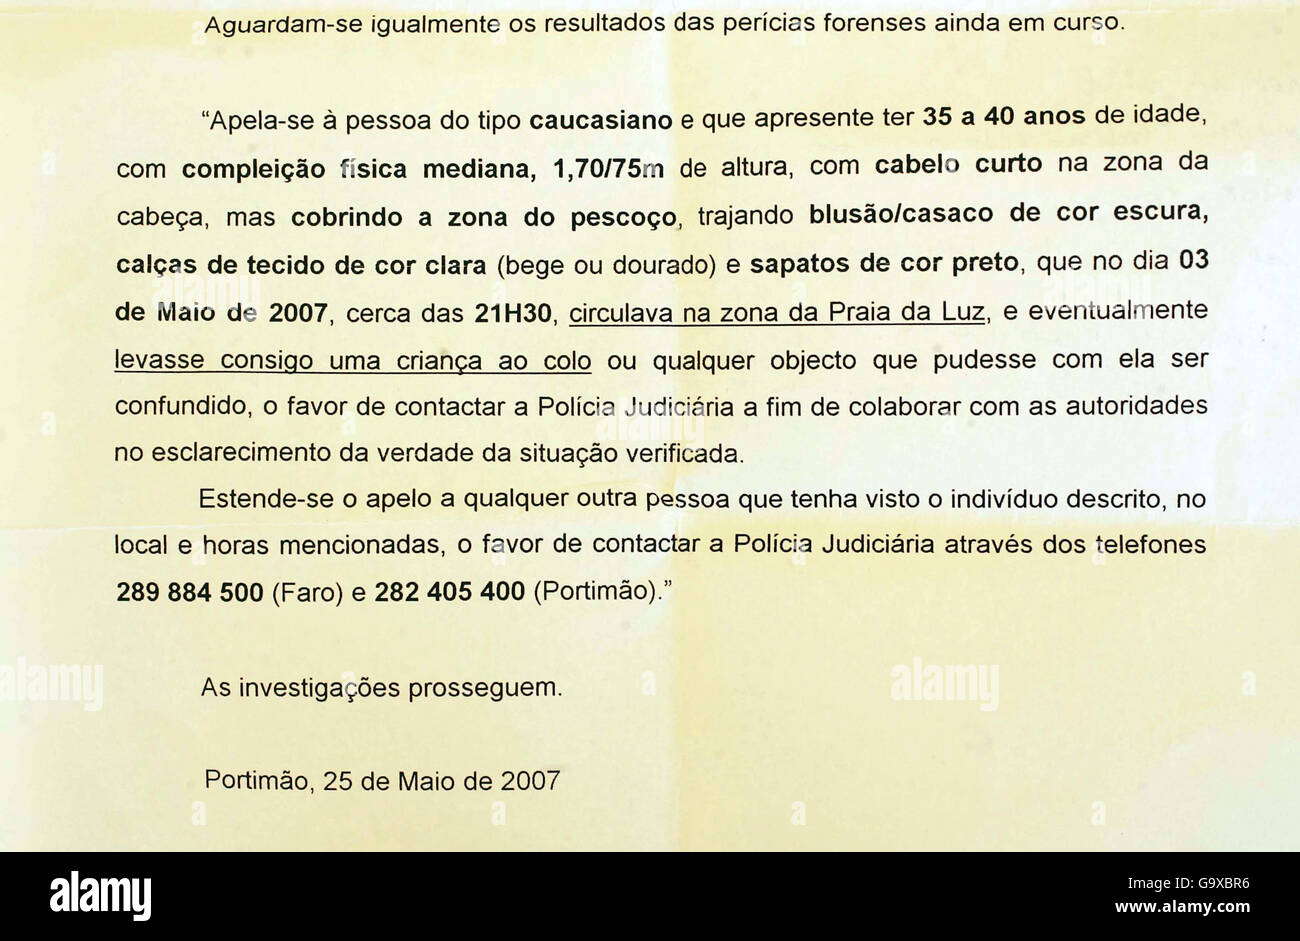 A press release, in portugese, from the Portuguese police where there was discrepancy between the english translation of the description of the man thought to have abducted Madeleine McCann and the Portugese description. Stock Photo